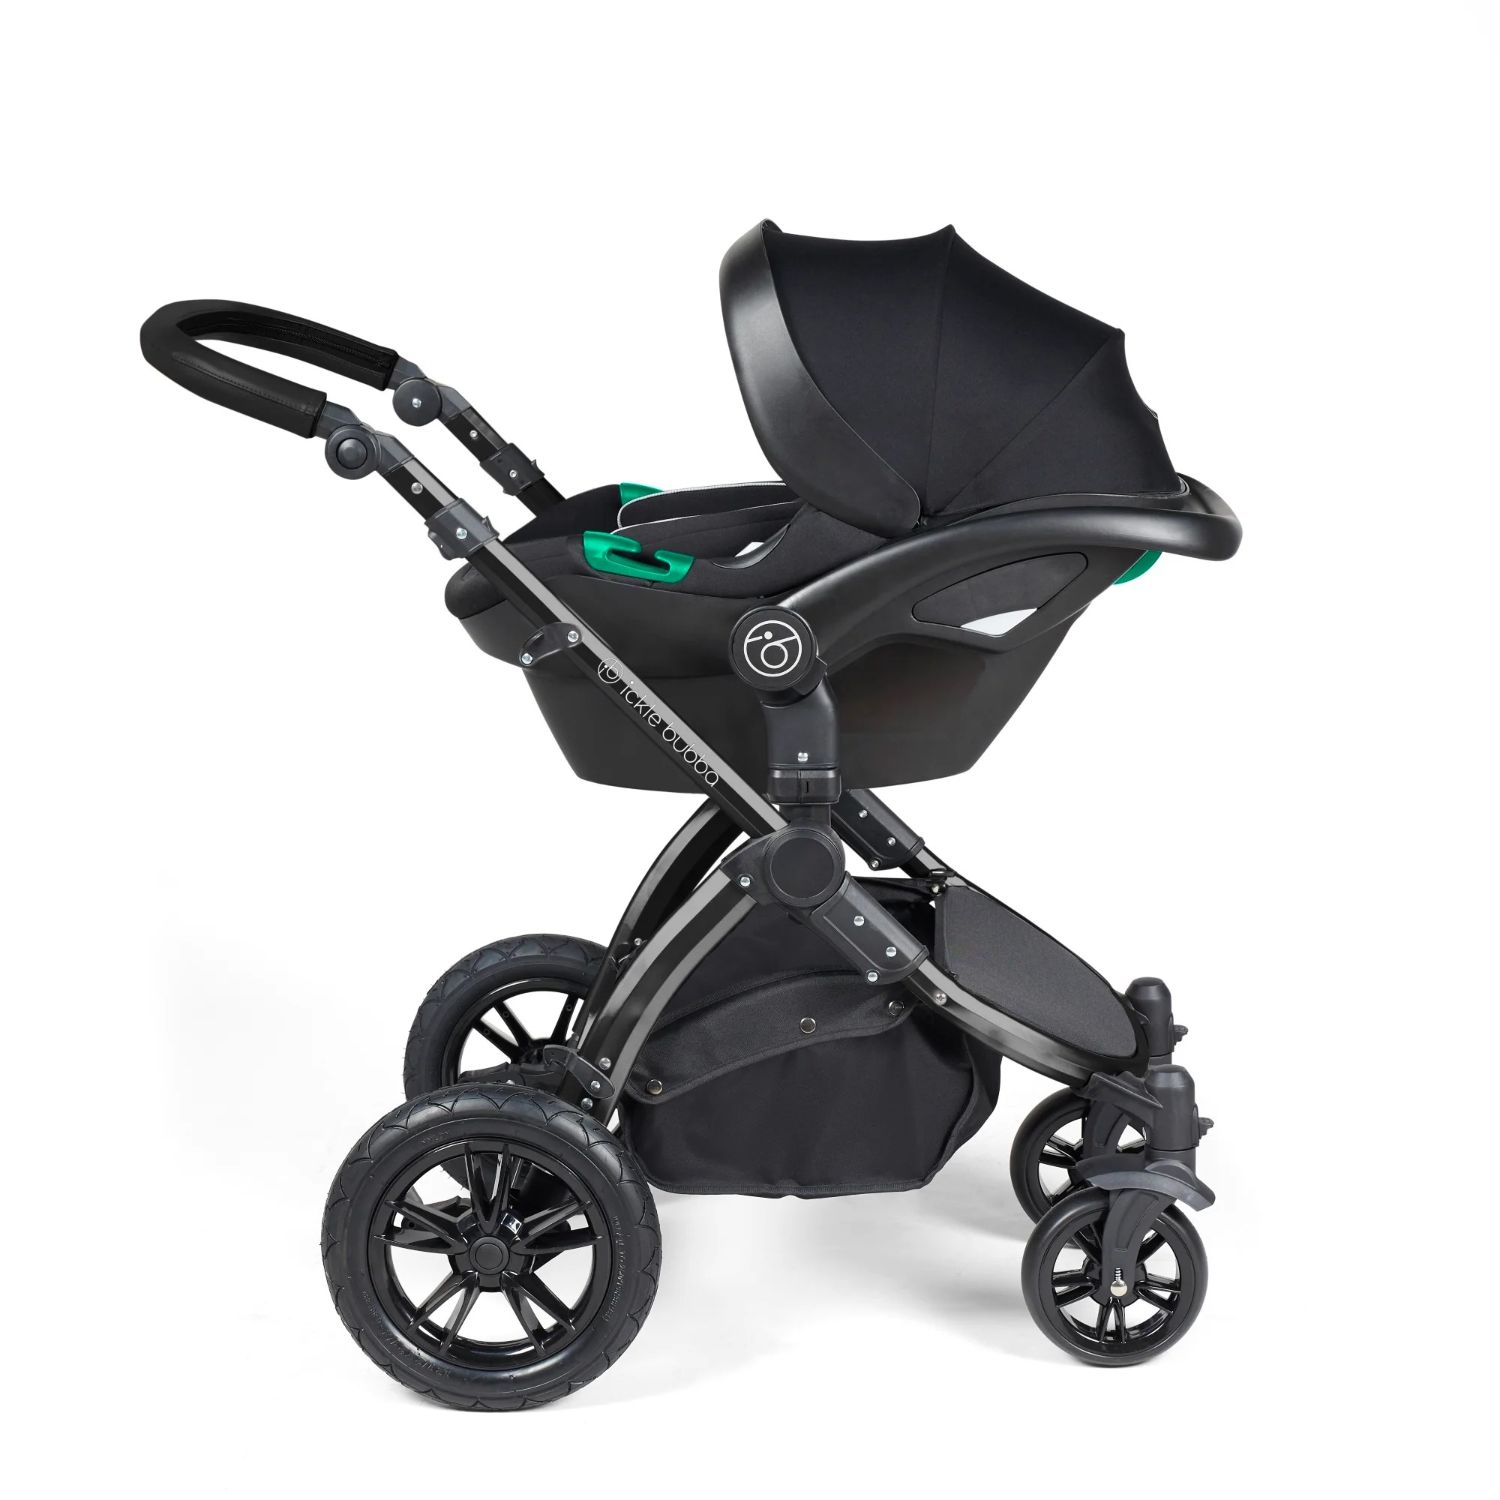 Ickle Bubba Stomp Luxe Pushchair with Stratus i-Size car seat attached in Woodland green colour